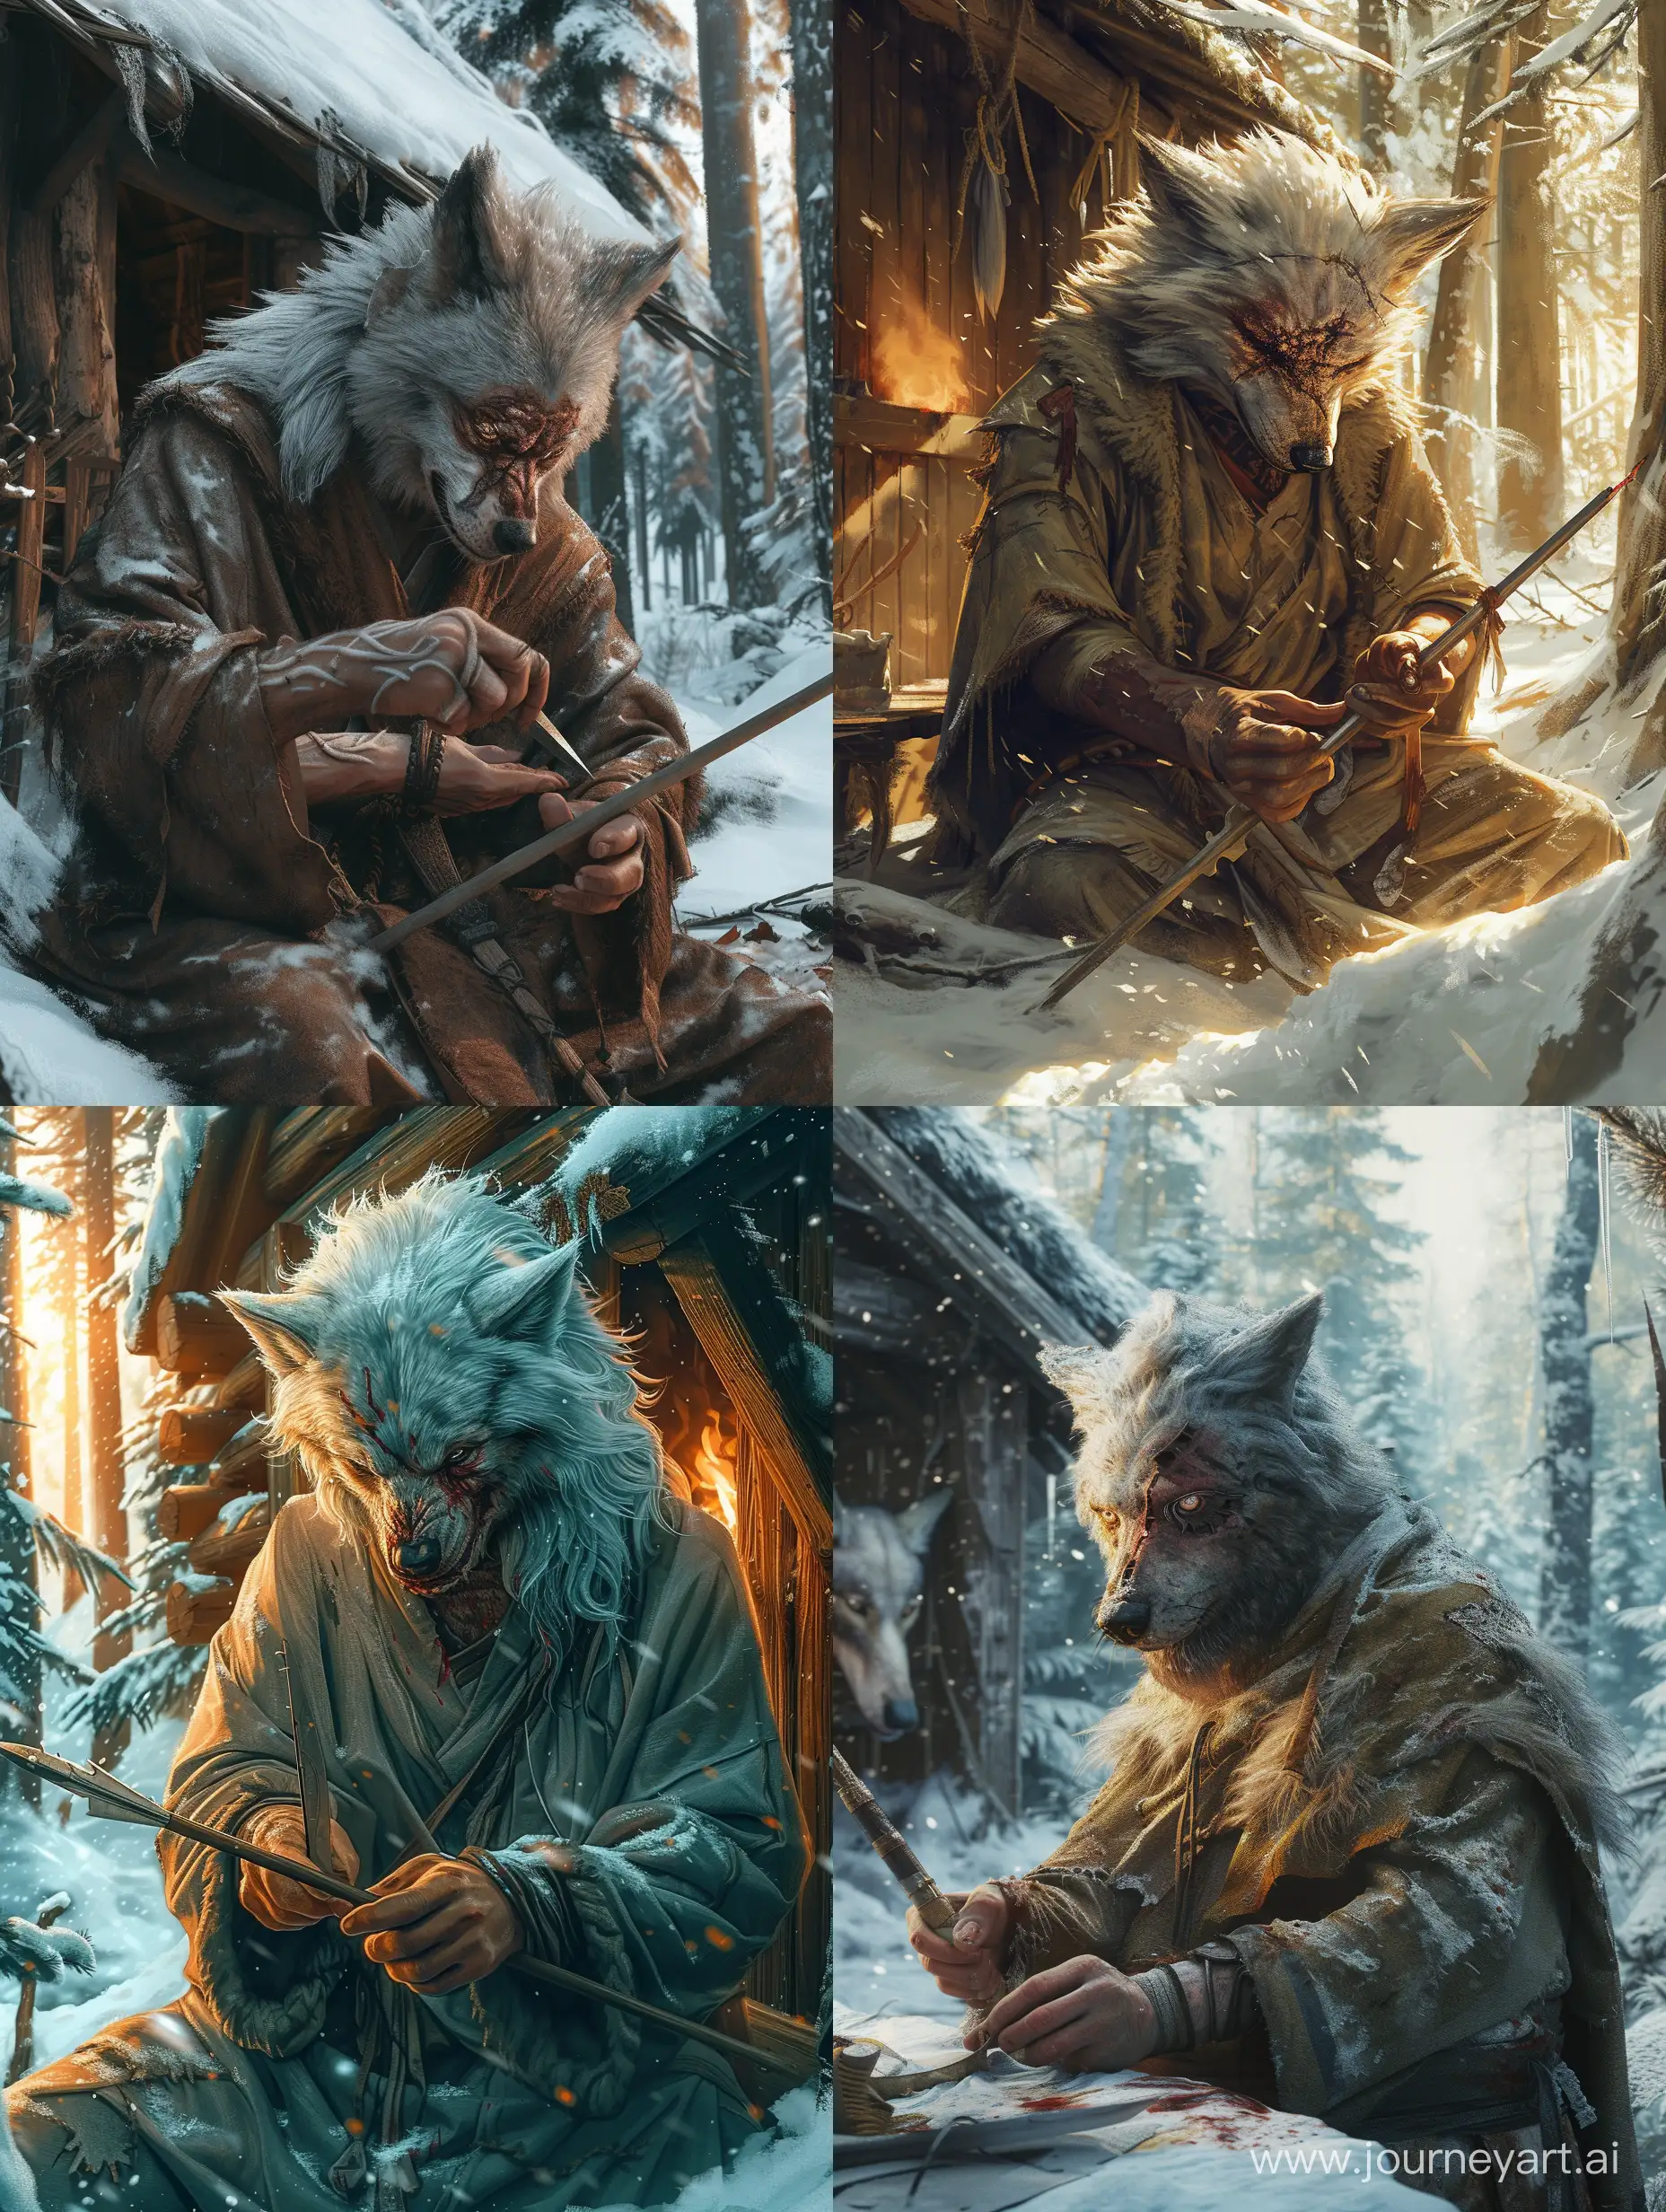 Mighty-Wolf-Warrior-Crafting-Spear-in-Enchanting-Snowy-Forest